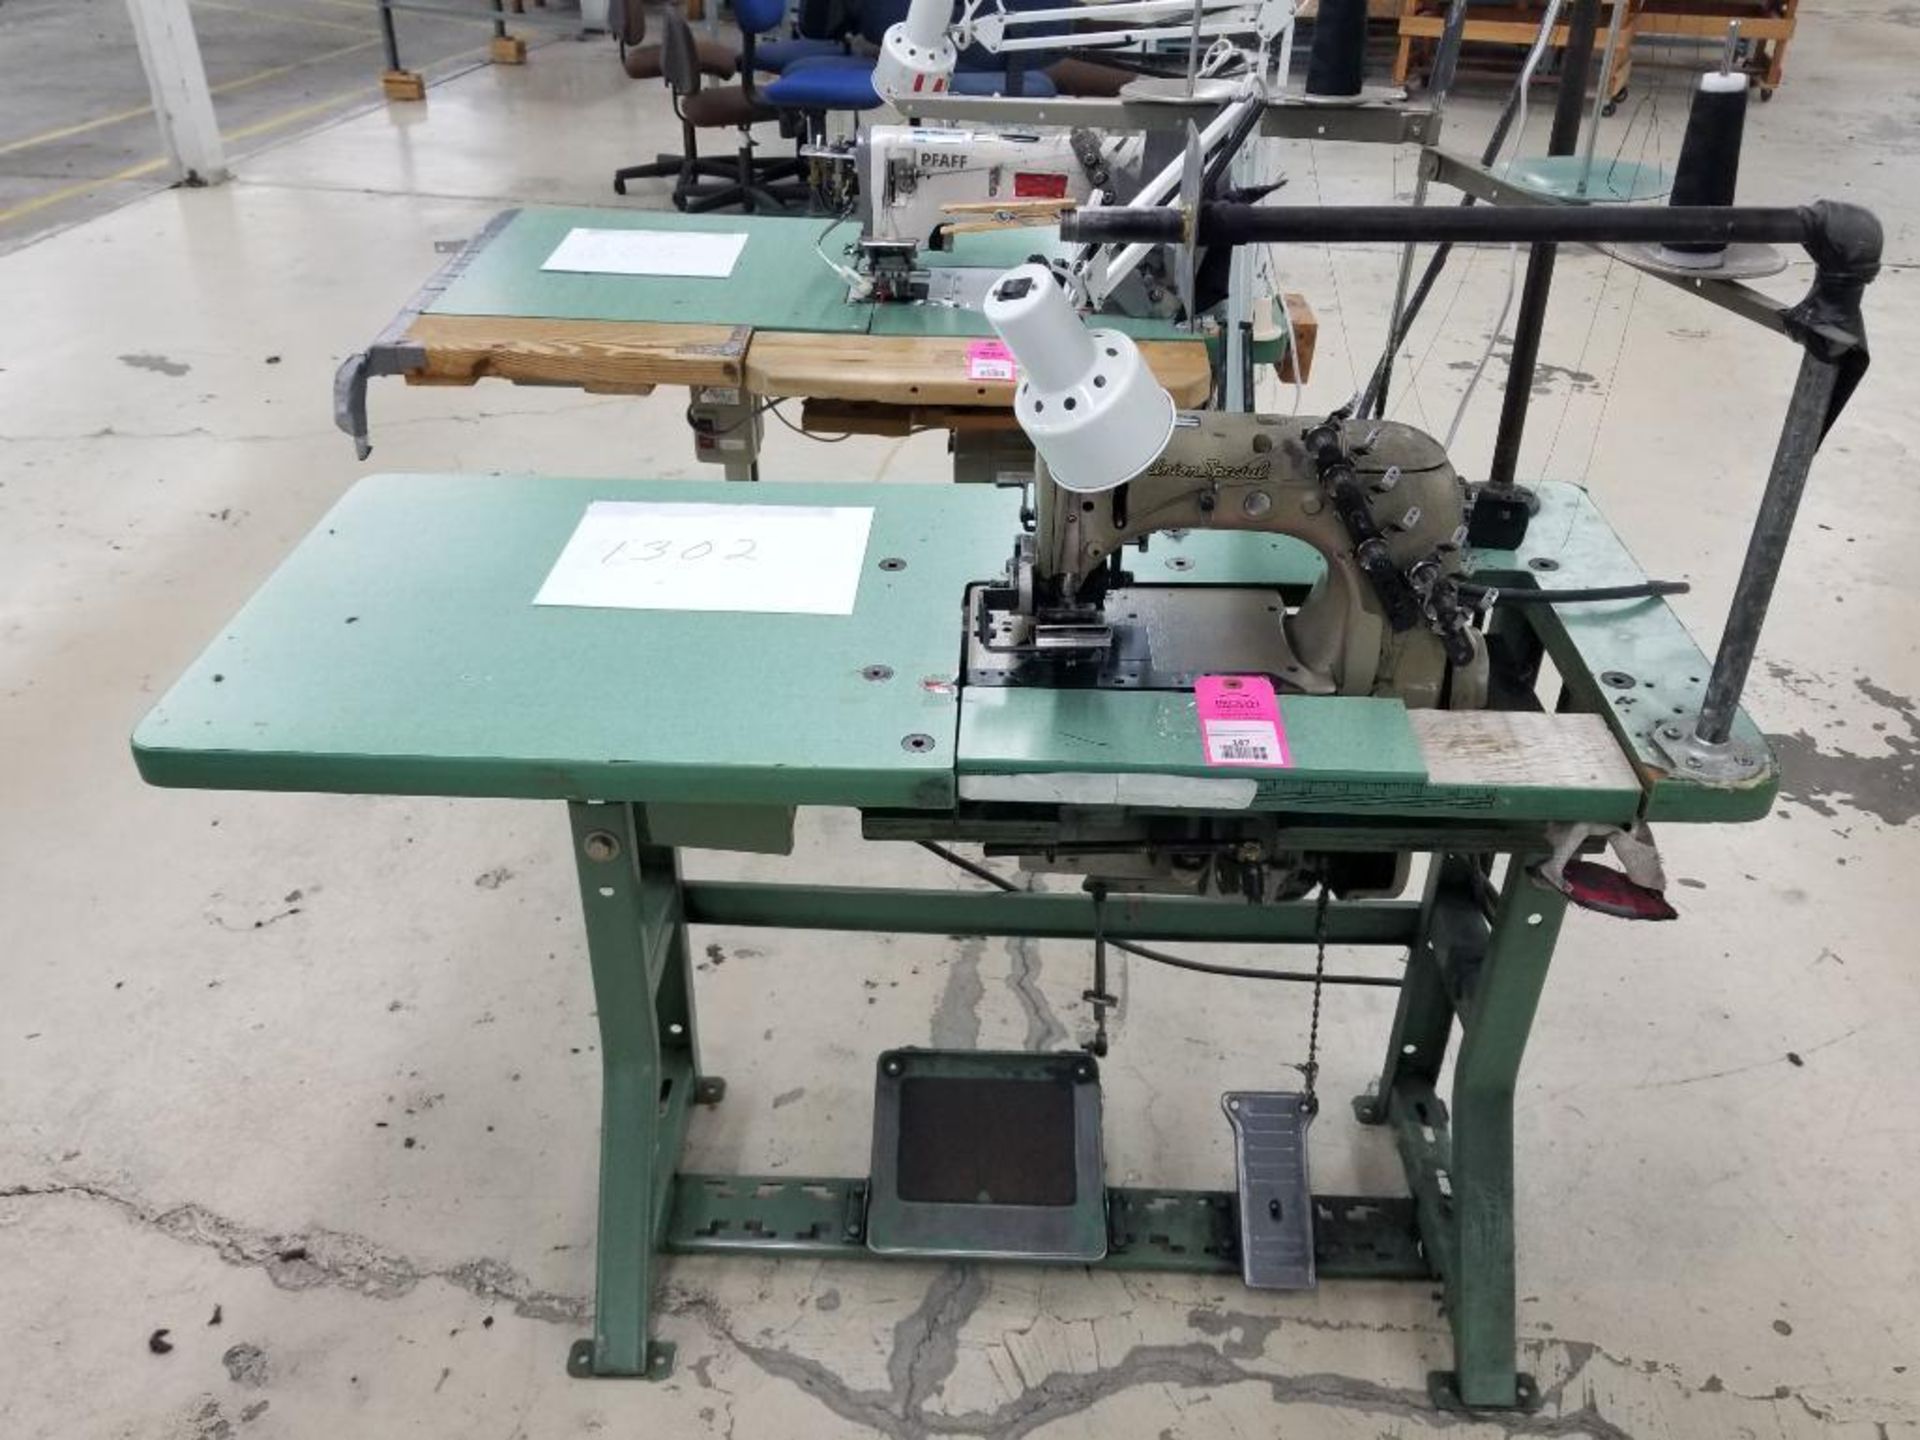 Union Special industrial sewing machine. Model 51800-BX. Serial #1648885. 3 phase, 220-240v.